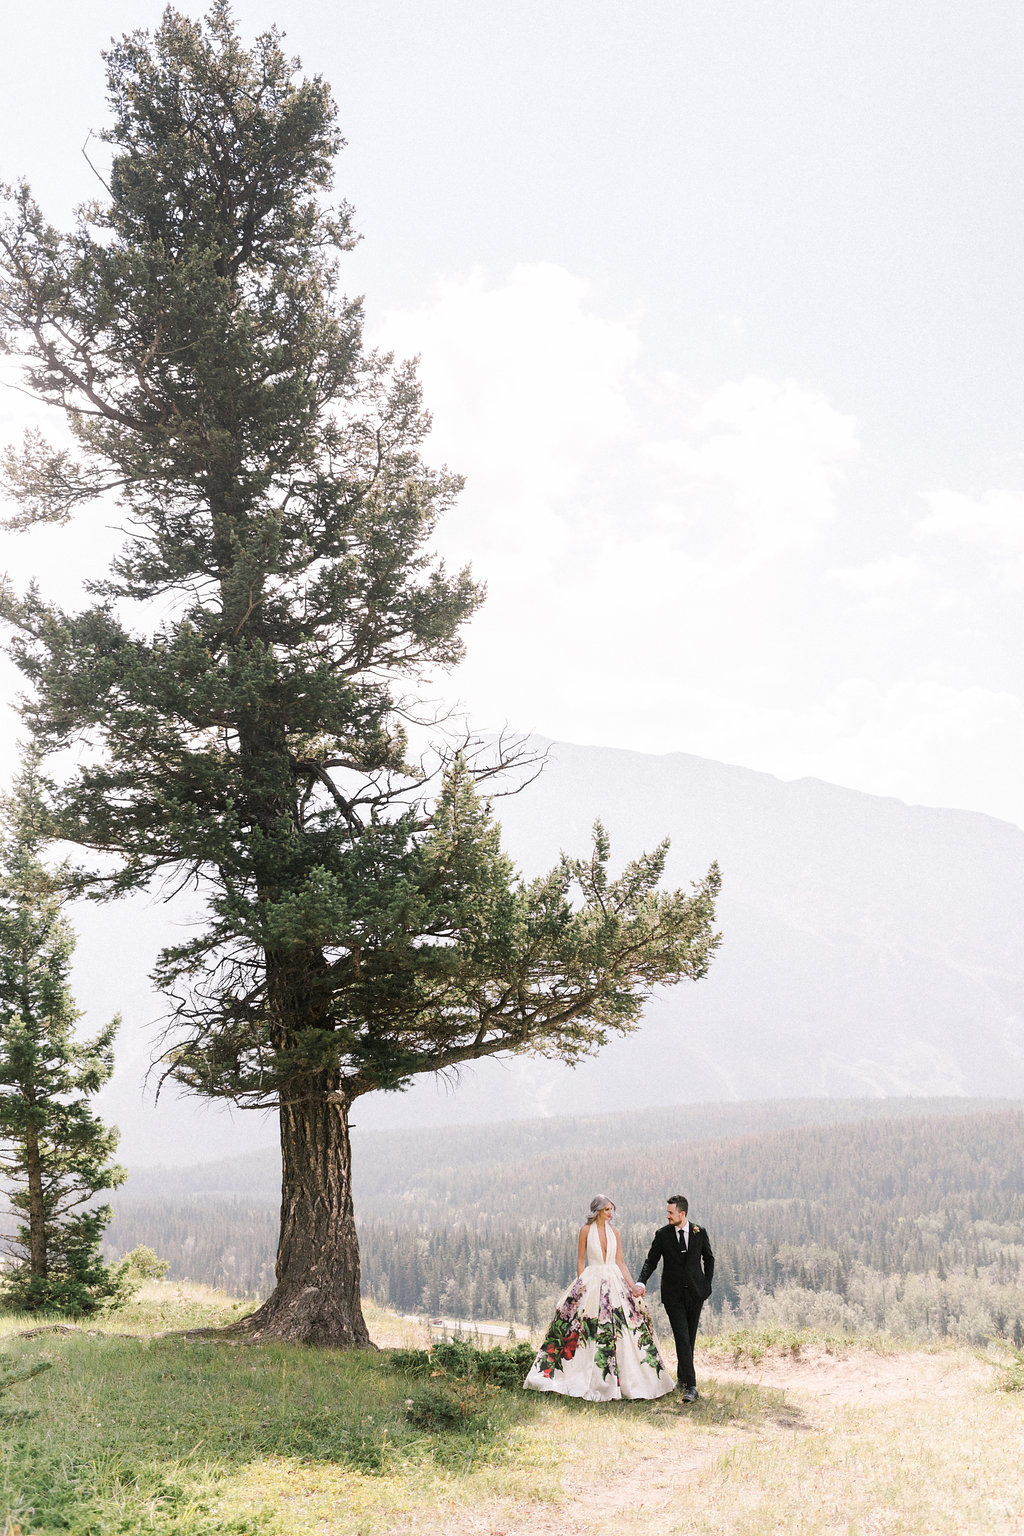 This Bride's Colourful Wedding Dress Will Have You Swooning at This Non-Traditional RimRock Resort Wedding in Banff